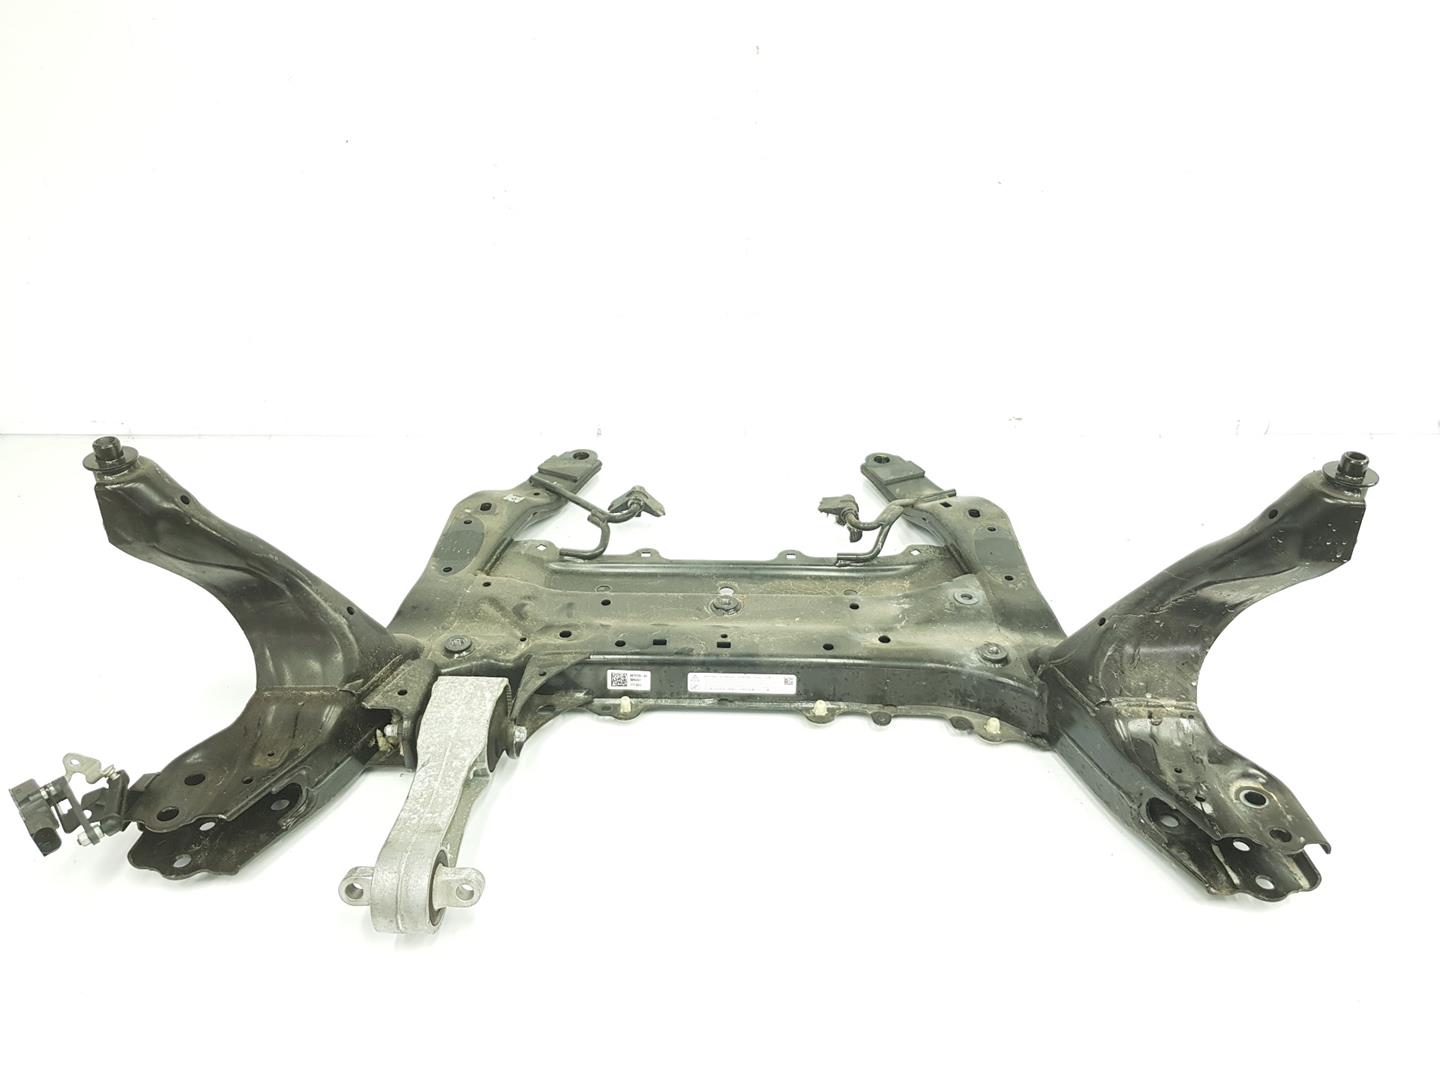 BMW X1 (F48) Front Suspension Subframe 31116872729, 31116872729 24150775